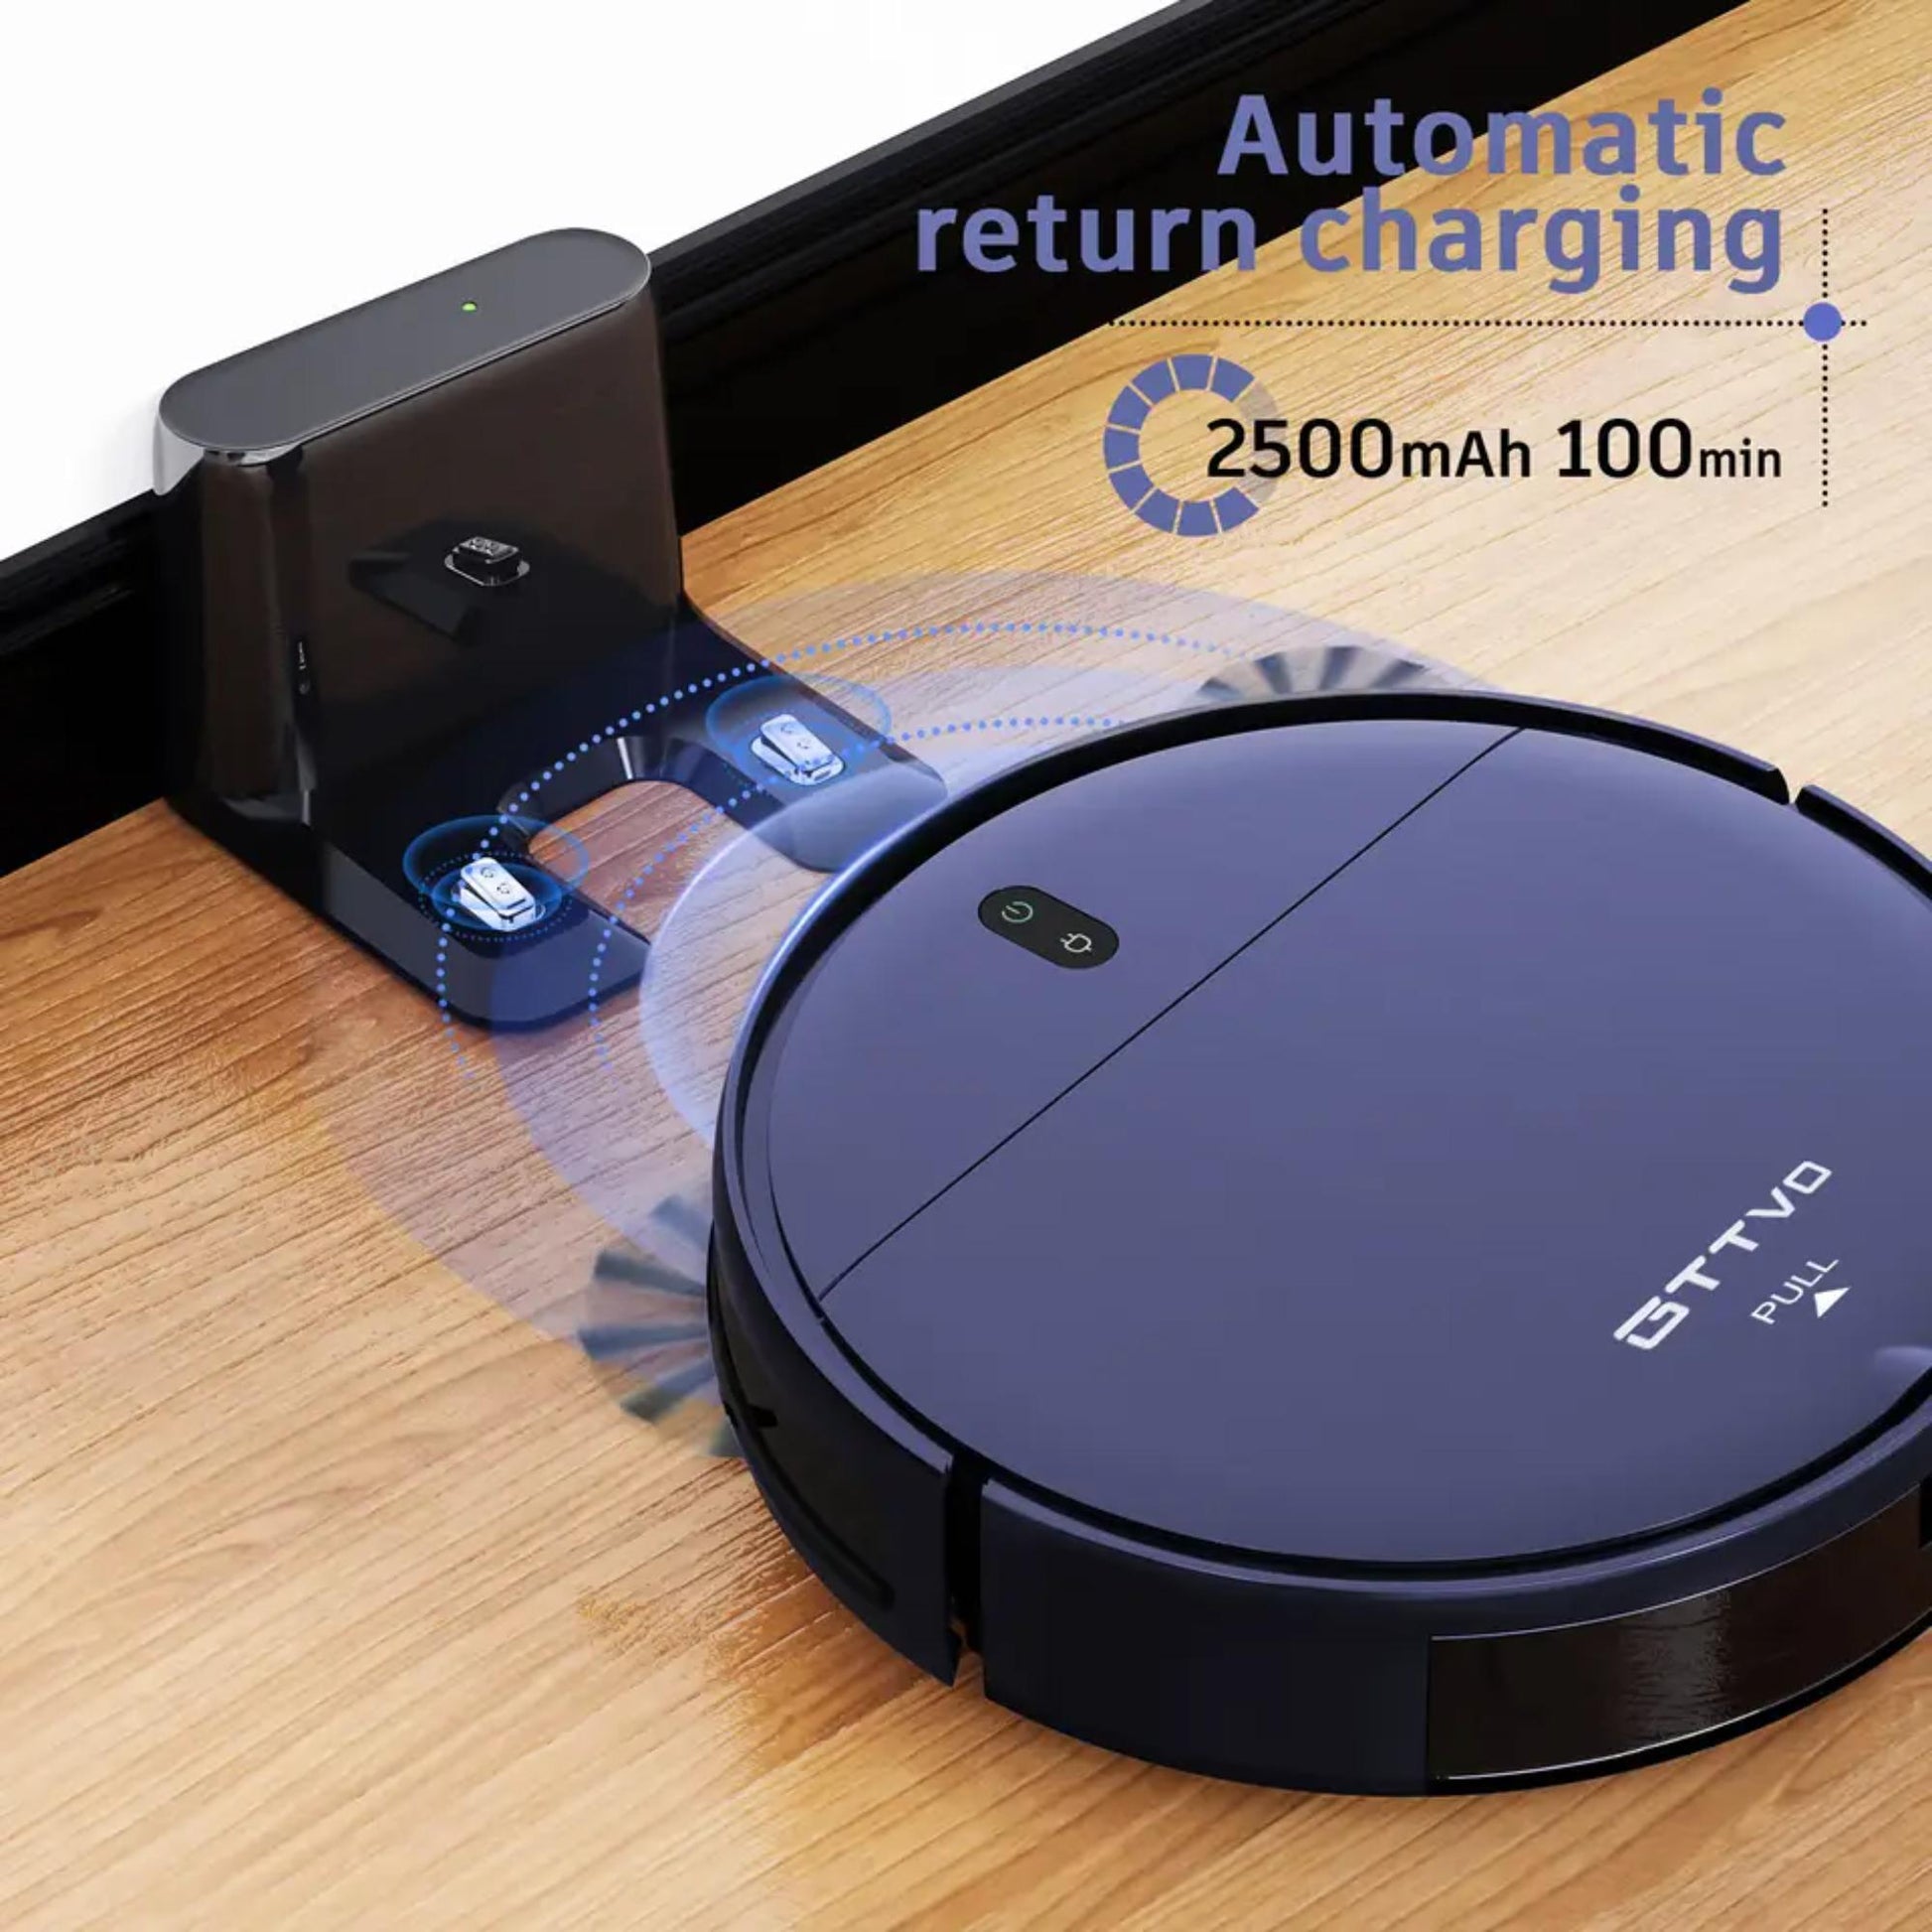 ONSON BR151 Robot Vacuum Cleaner with Automatic return charging. | Blue Chilli Electronics.